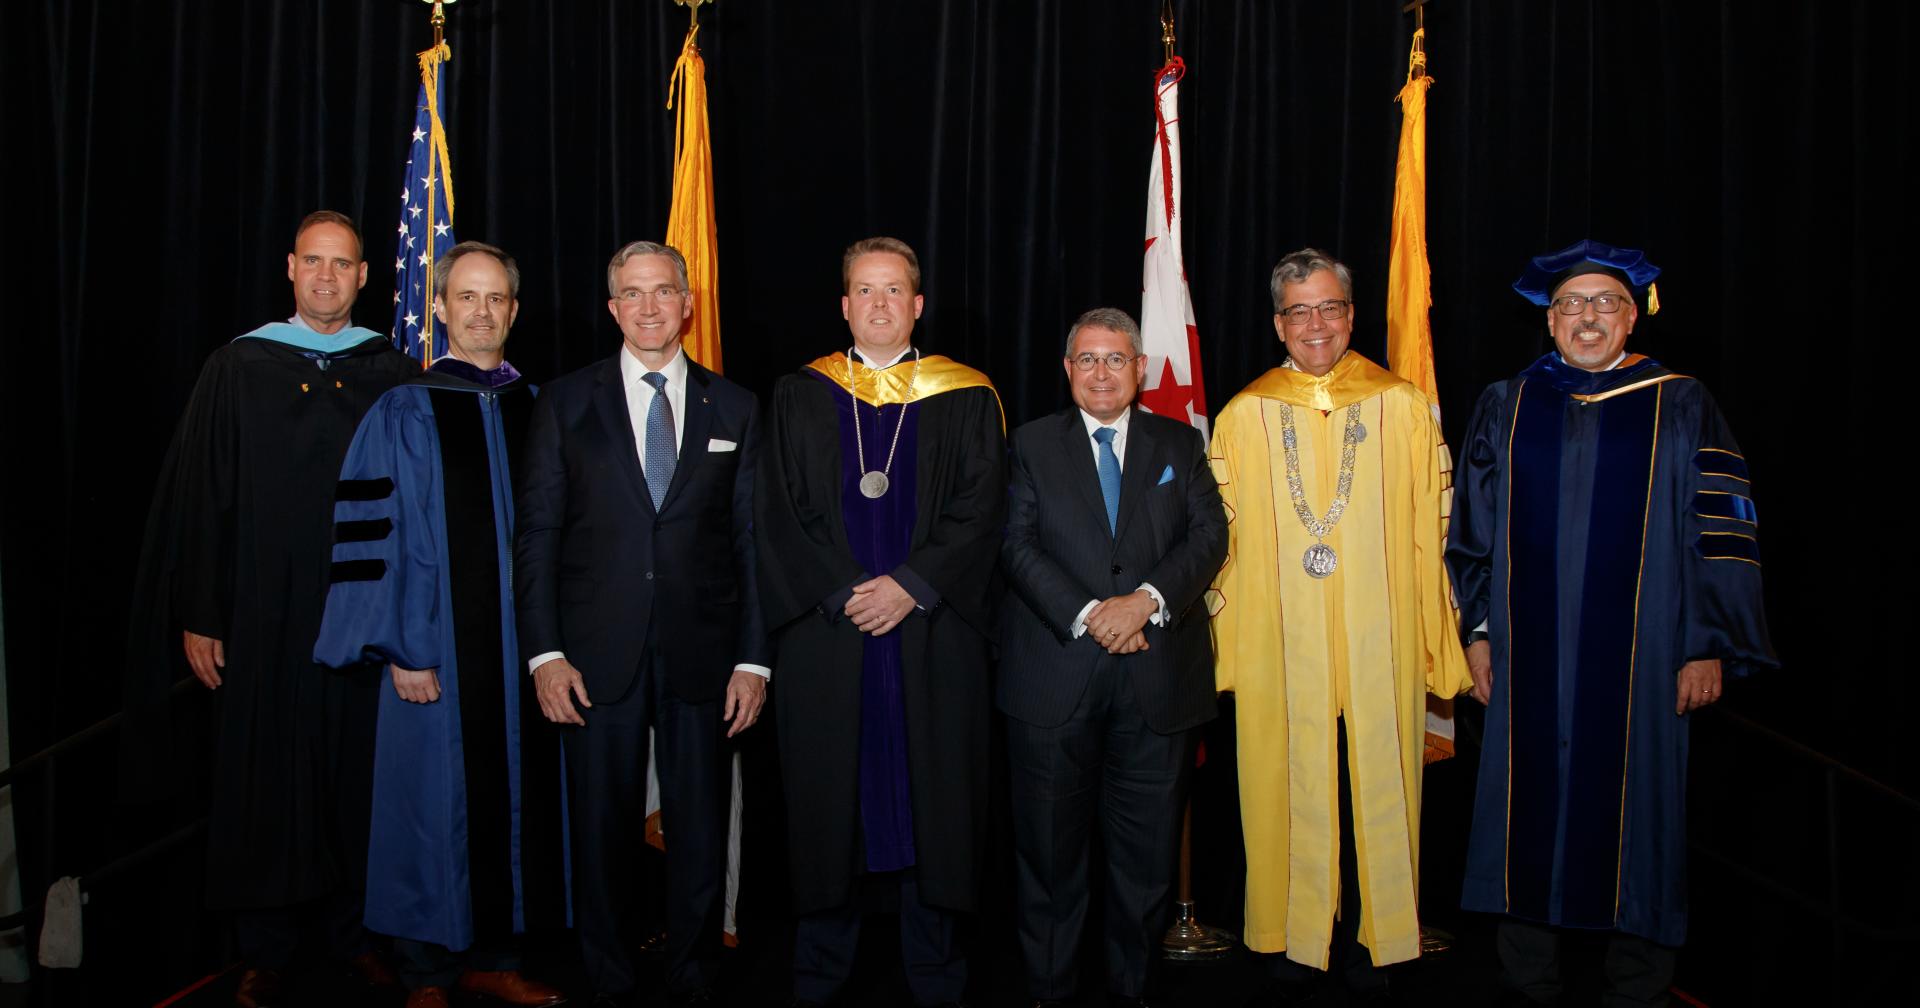 Kevin Walsh poses with President Peter Kilpatrick, University trustees, and administrators